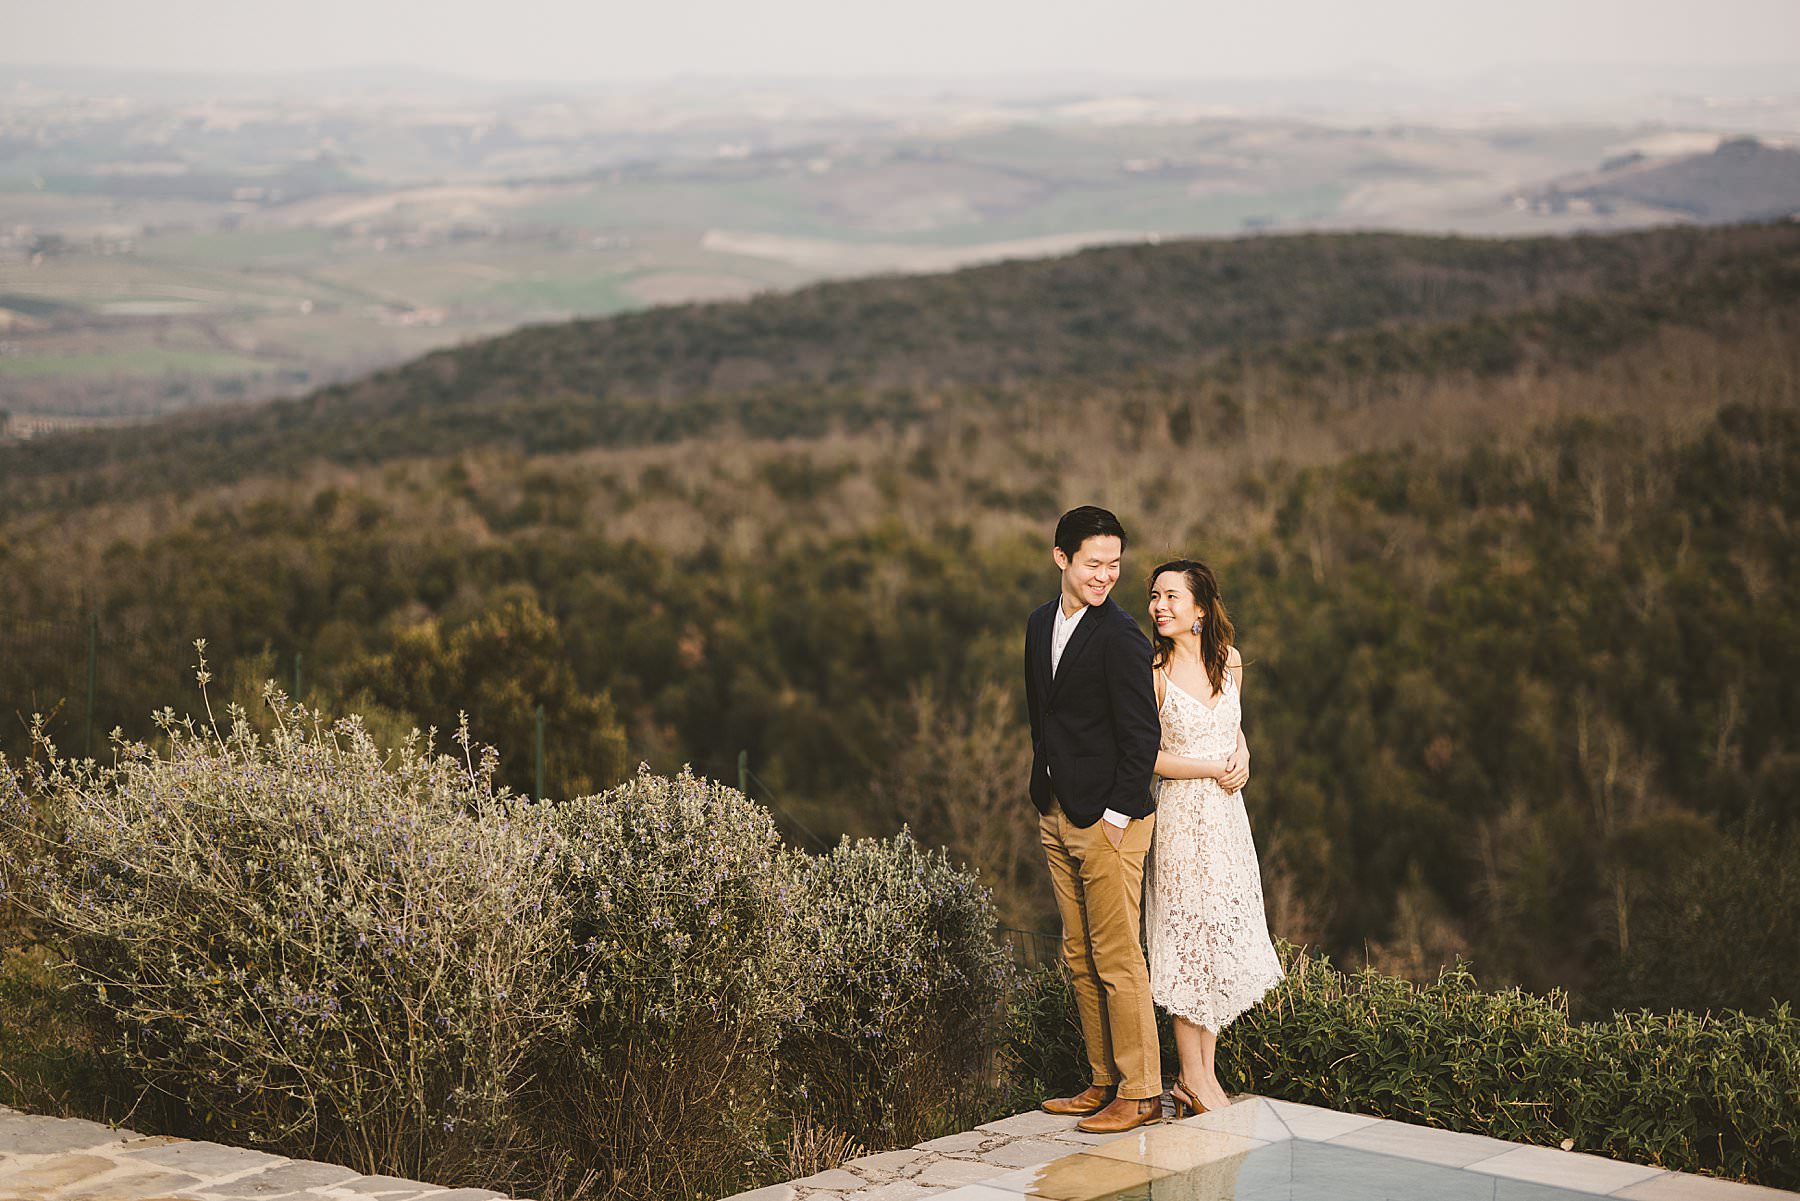 Rosewood Castiglion del Bosco, the perfect peaceful and private atmosphere setting for a pre-wedding engagement photo shoot in the heart of Tuscany